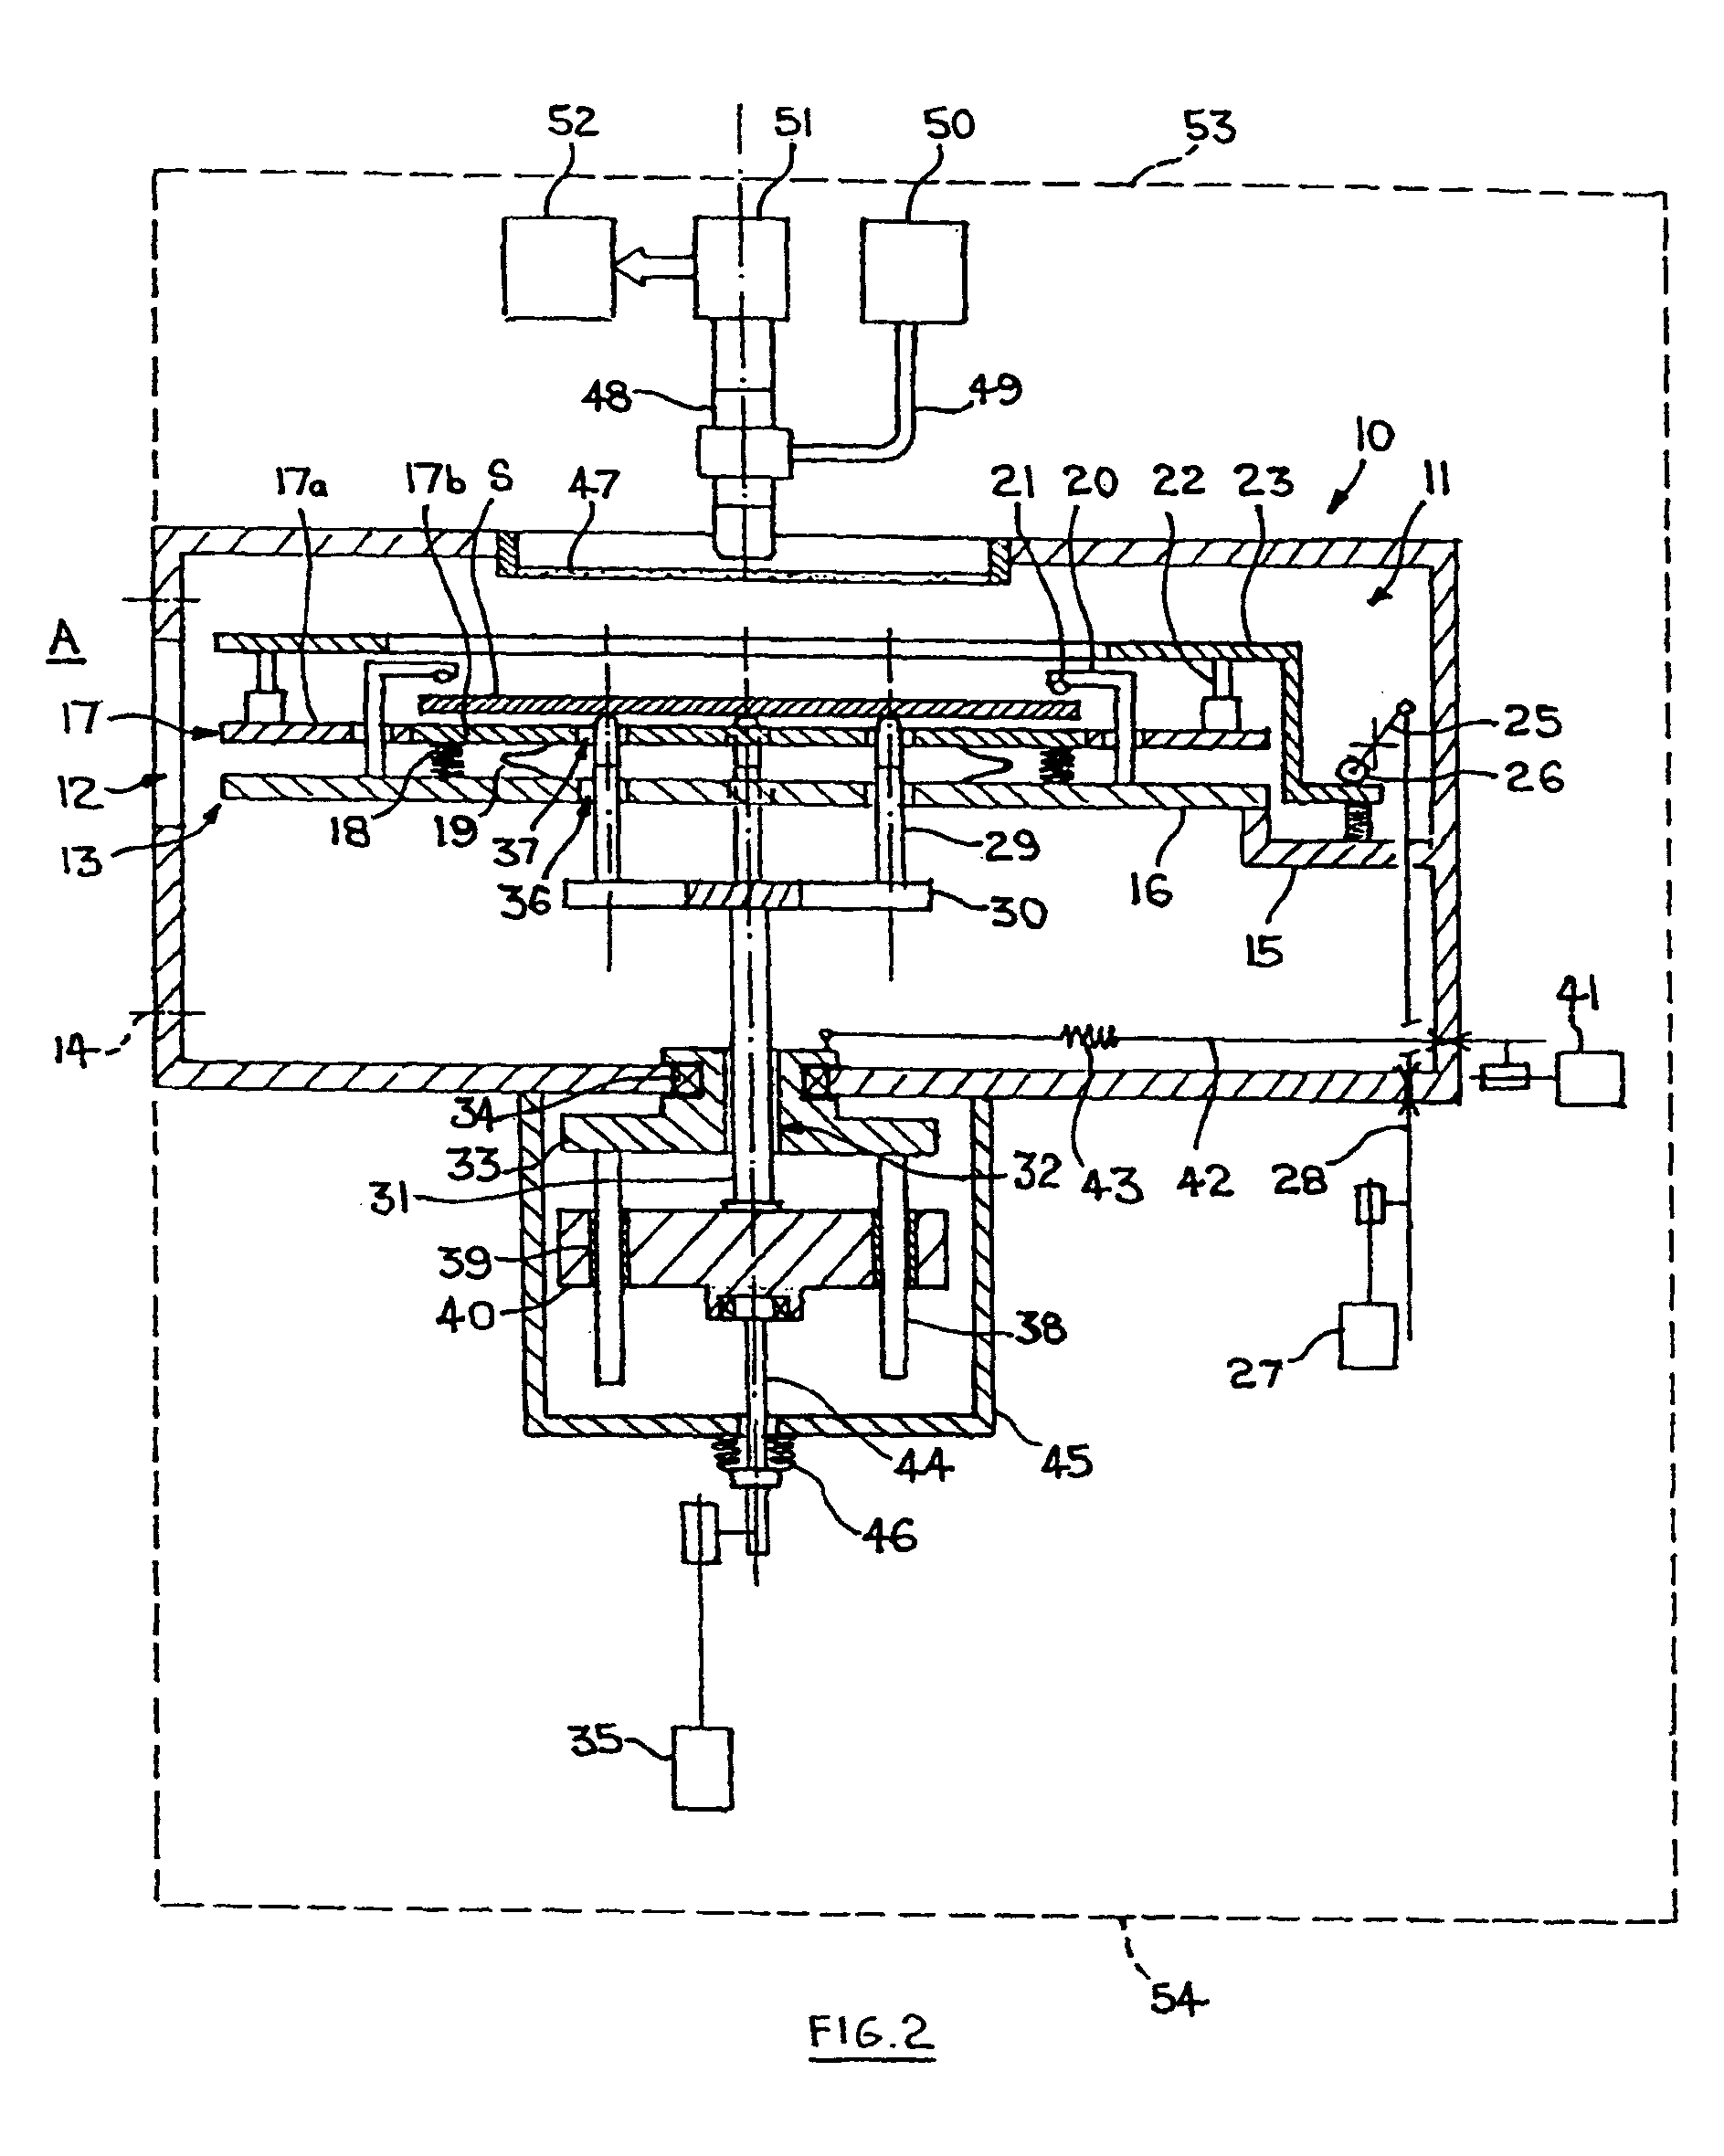 Substrate loading and unloading apparatus